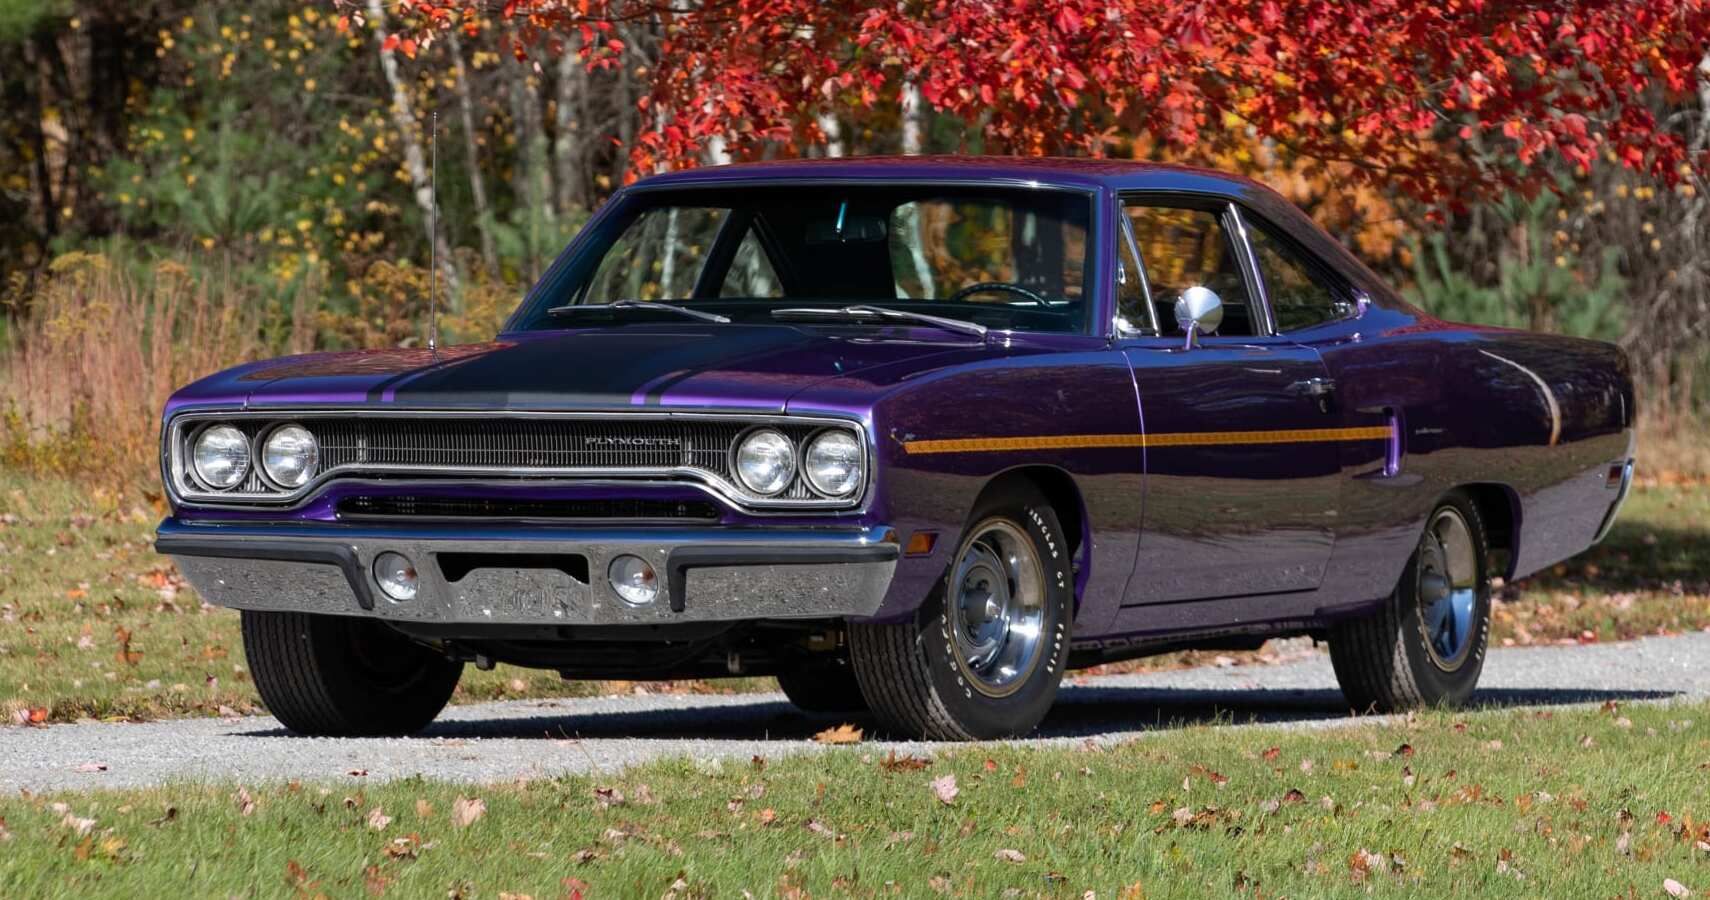 A purple 1970 Plymouth Road Runner Hemi parked